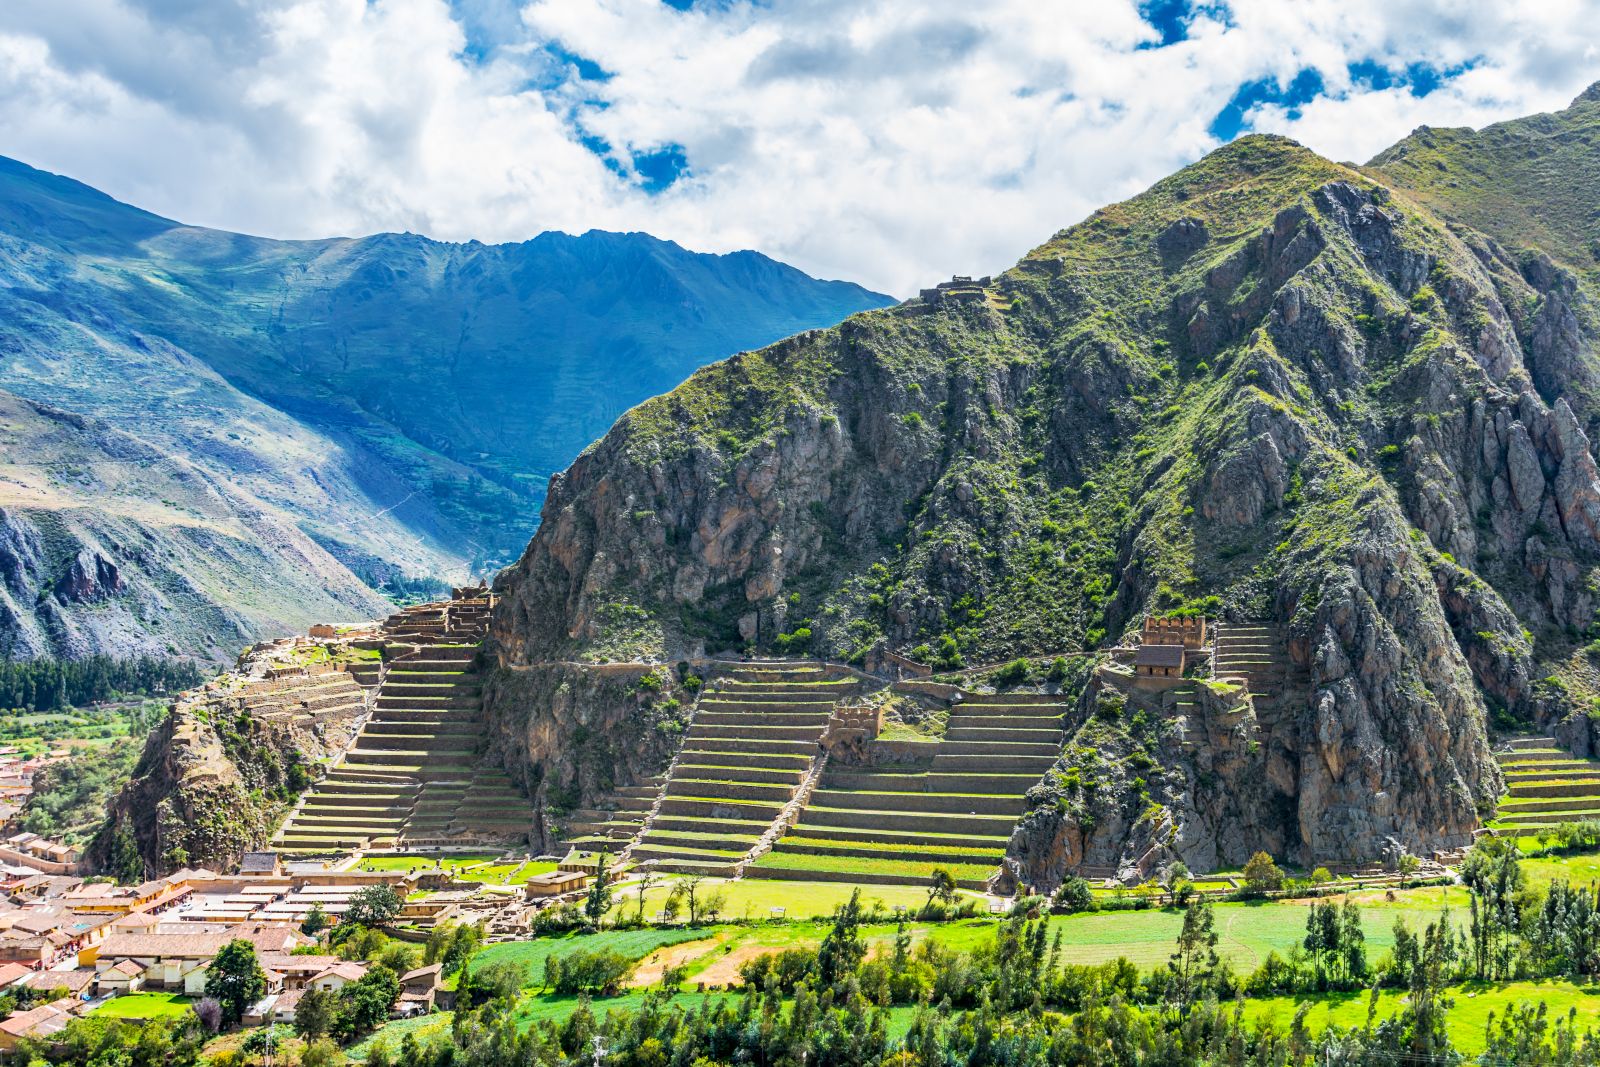 Distant view of the Inca fortress at Ollantaytambo in Peru and the mountain backdrop